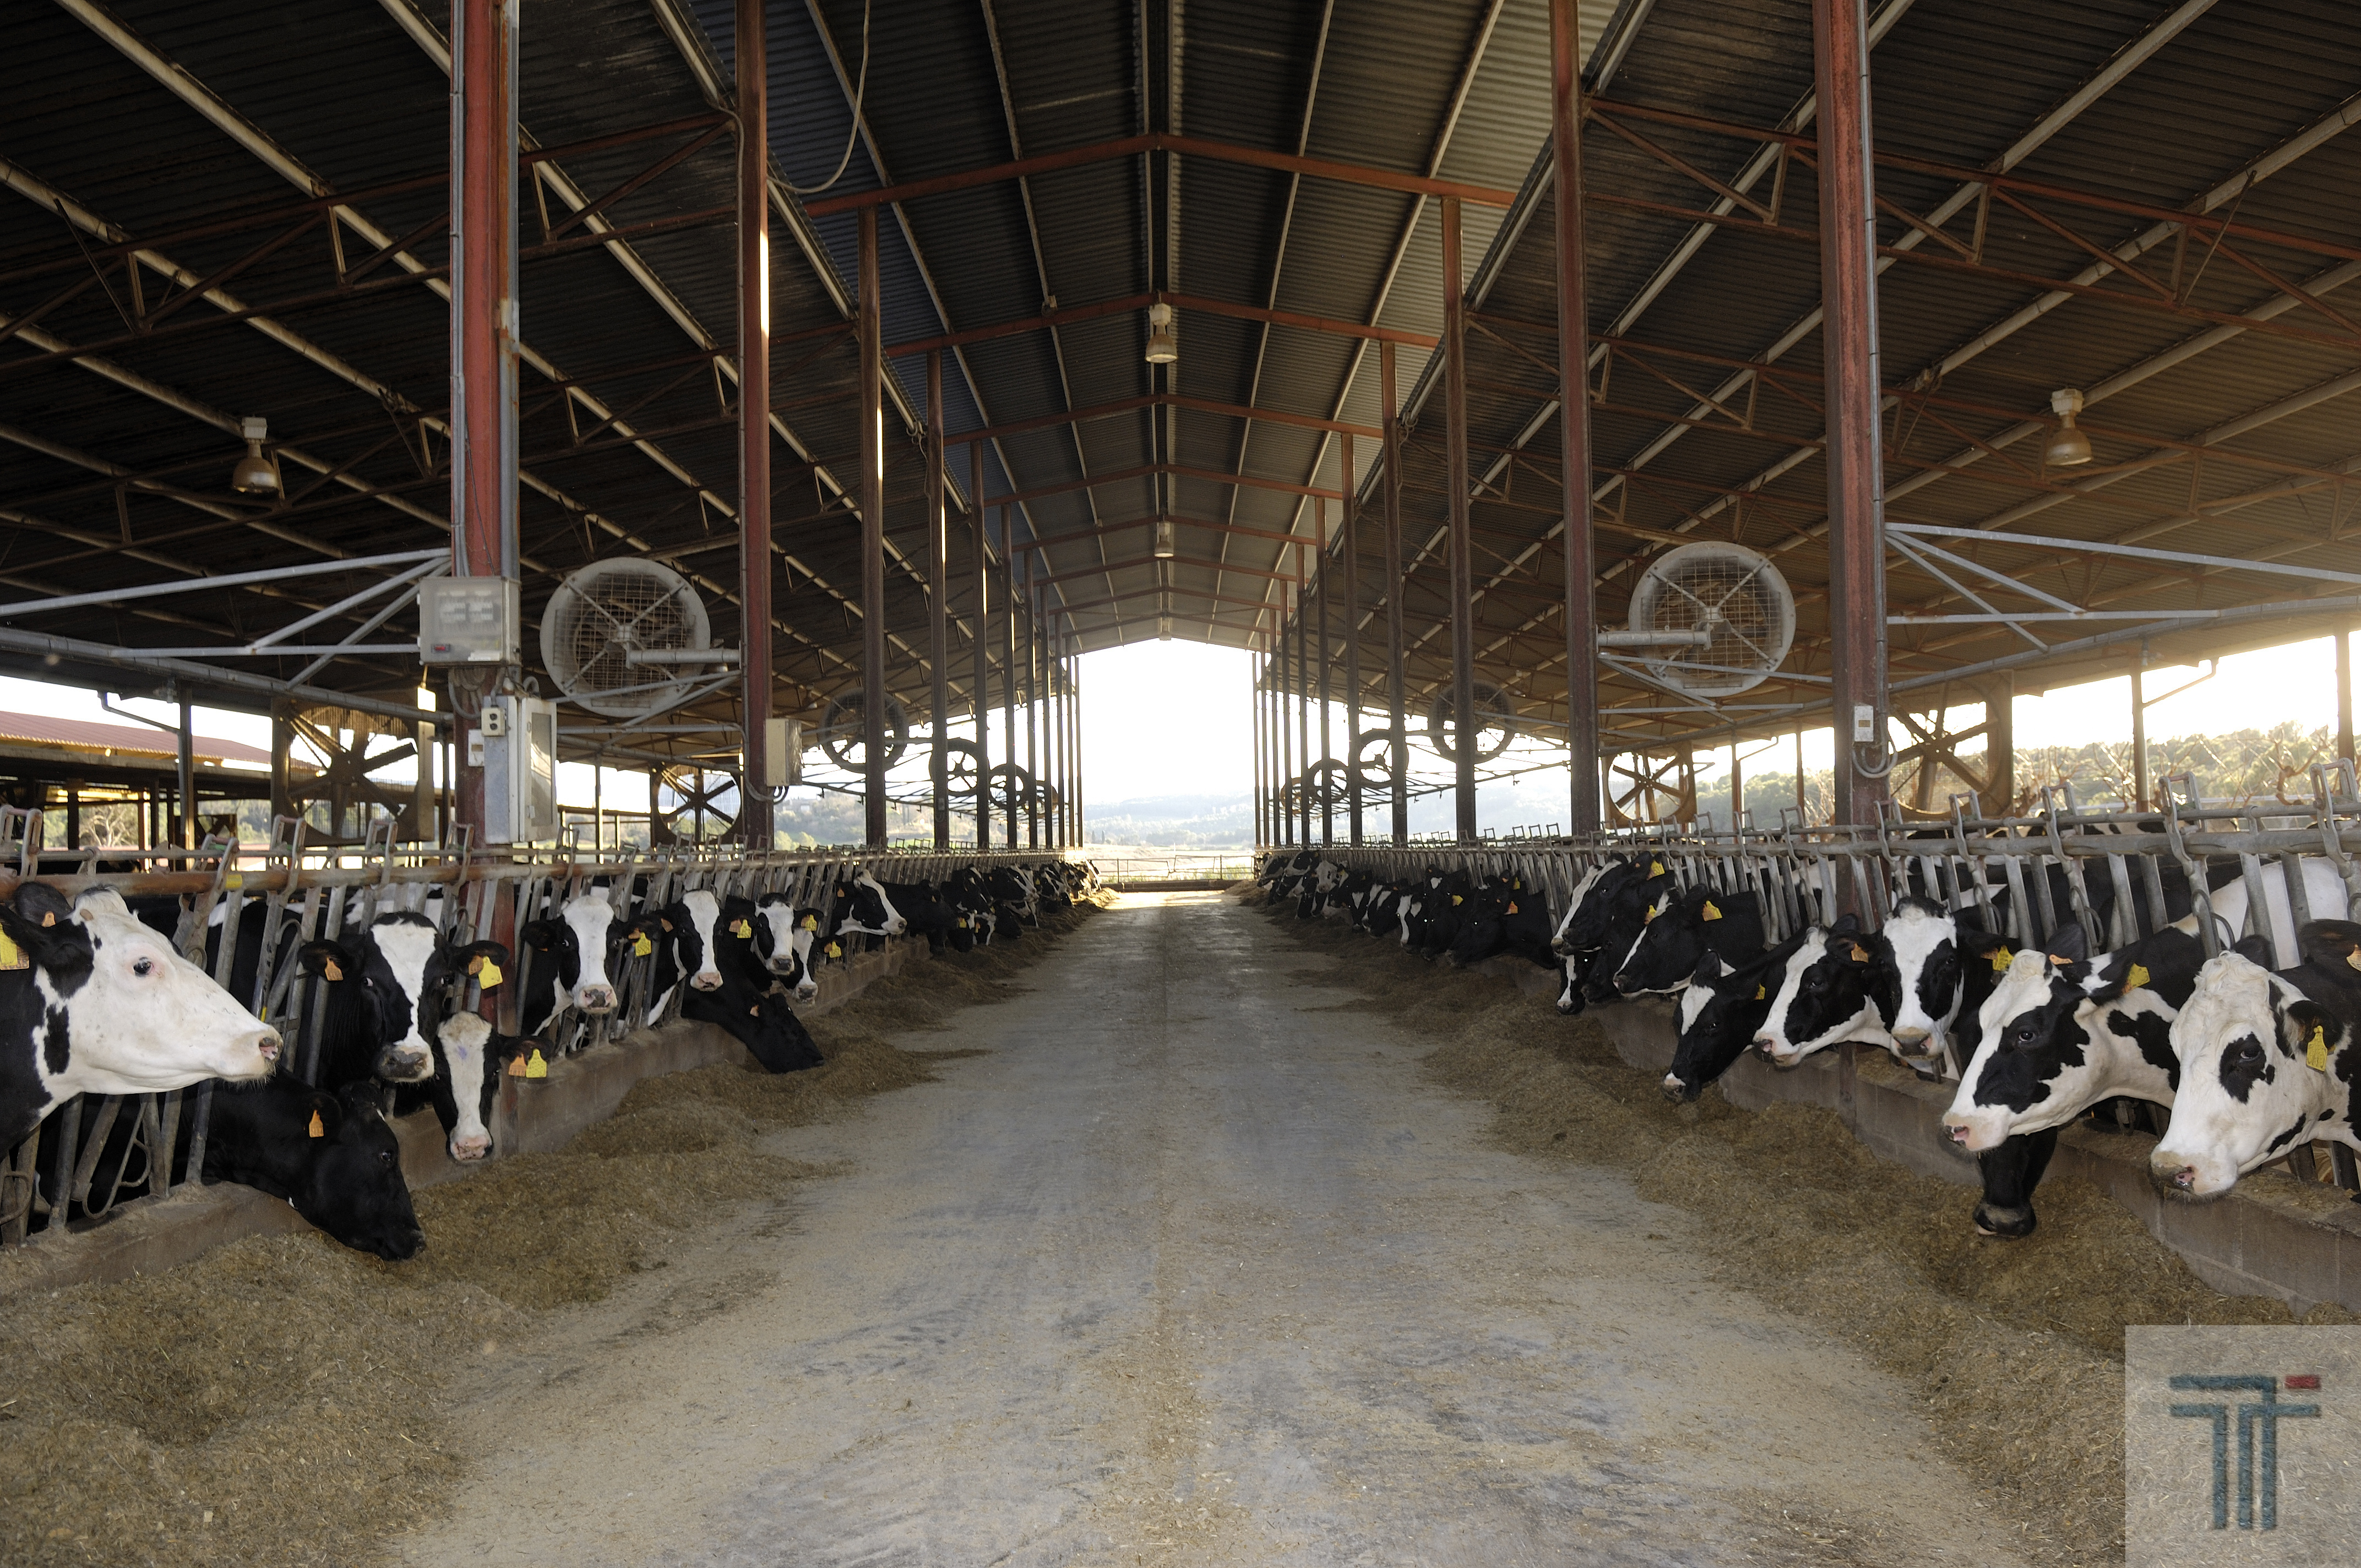 steel livestock buildings are popular in the agricultural community for many reasons